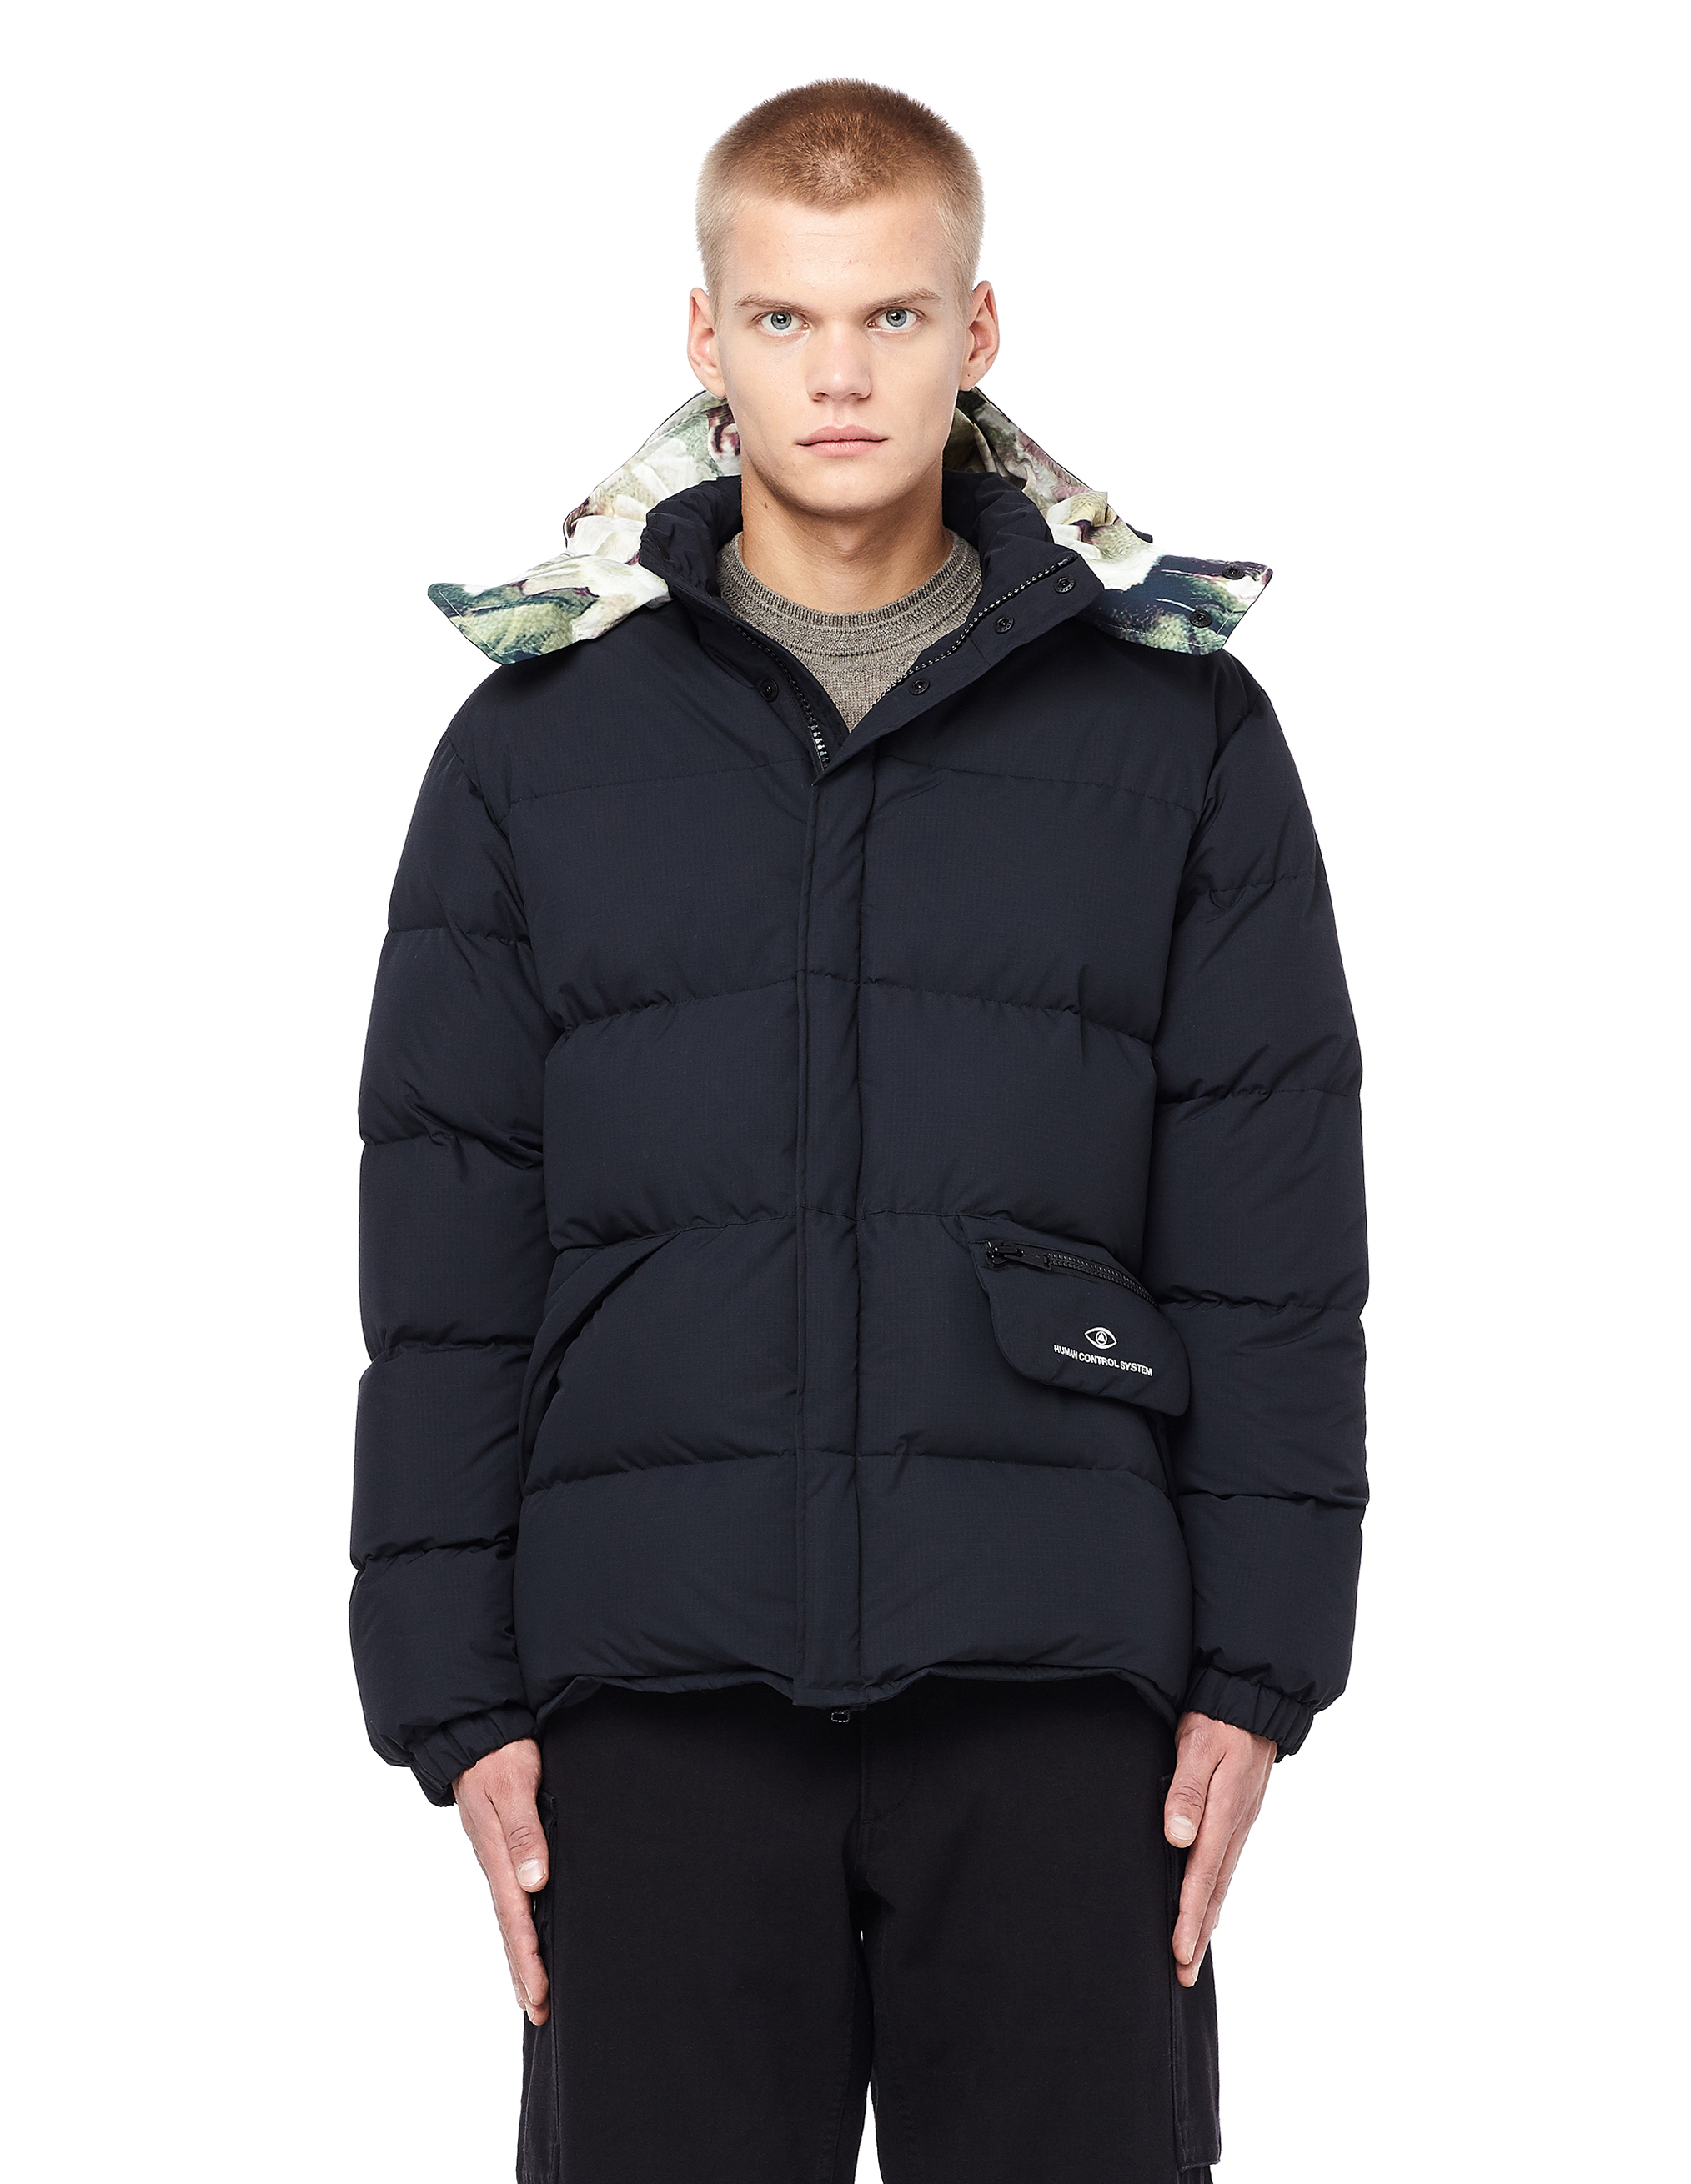 Buy Undercover men black puffer jacket with printed hood for $858